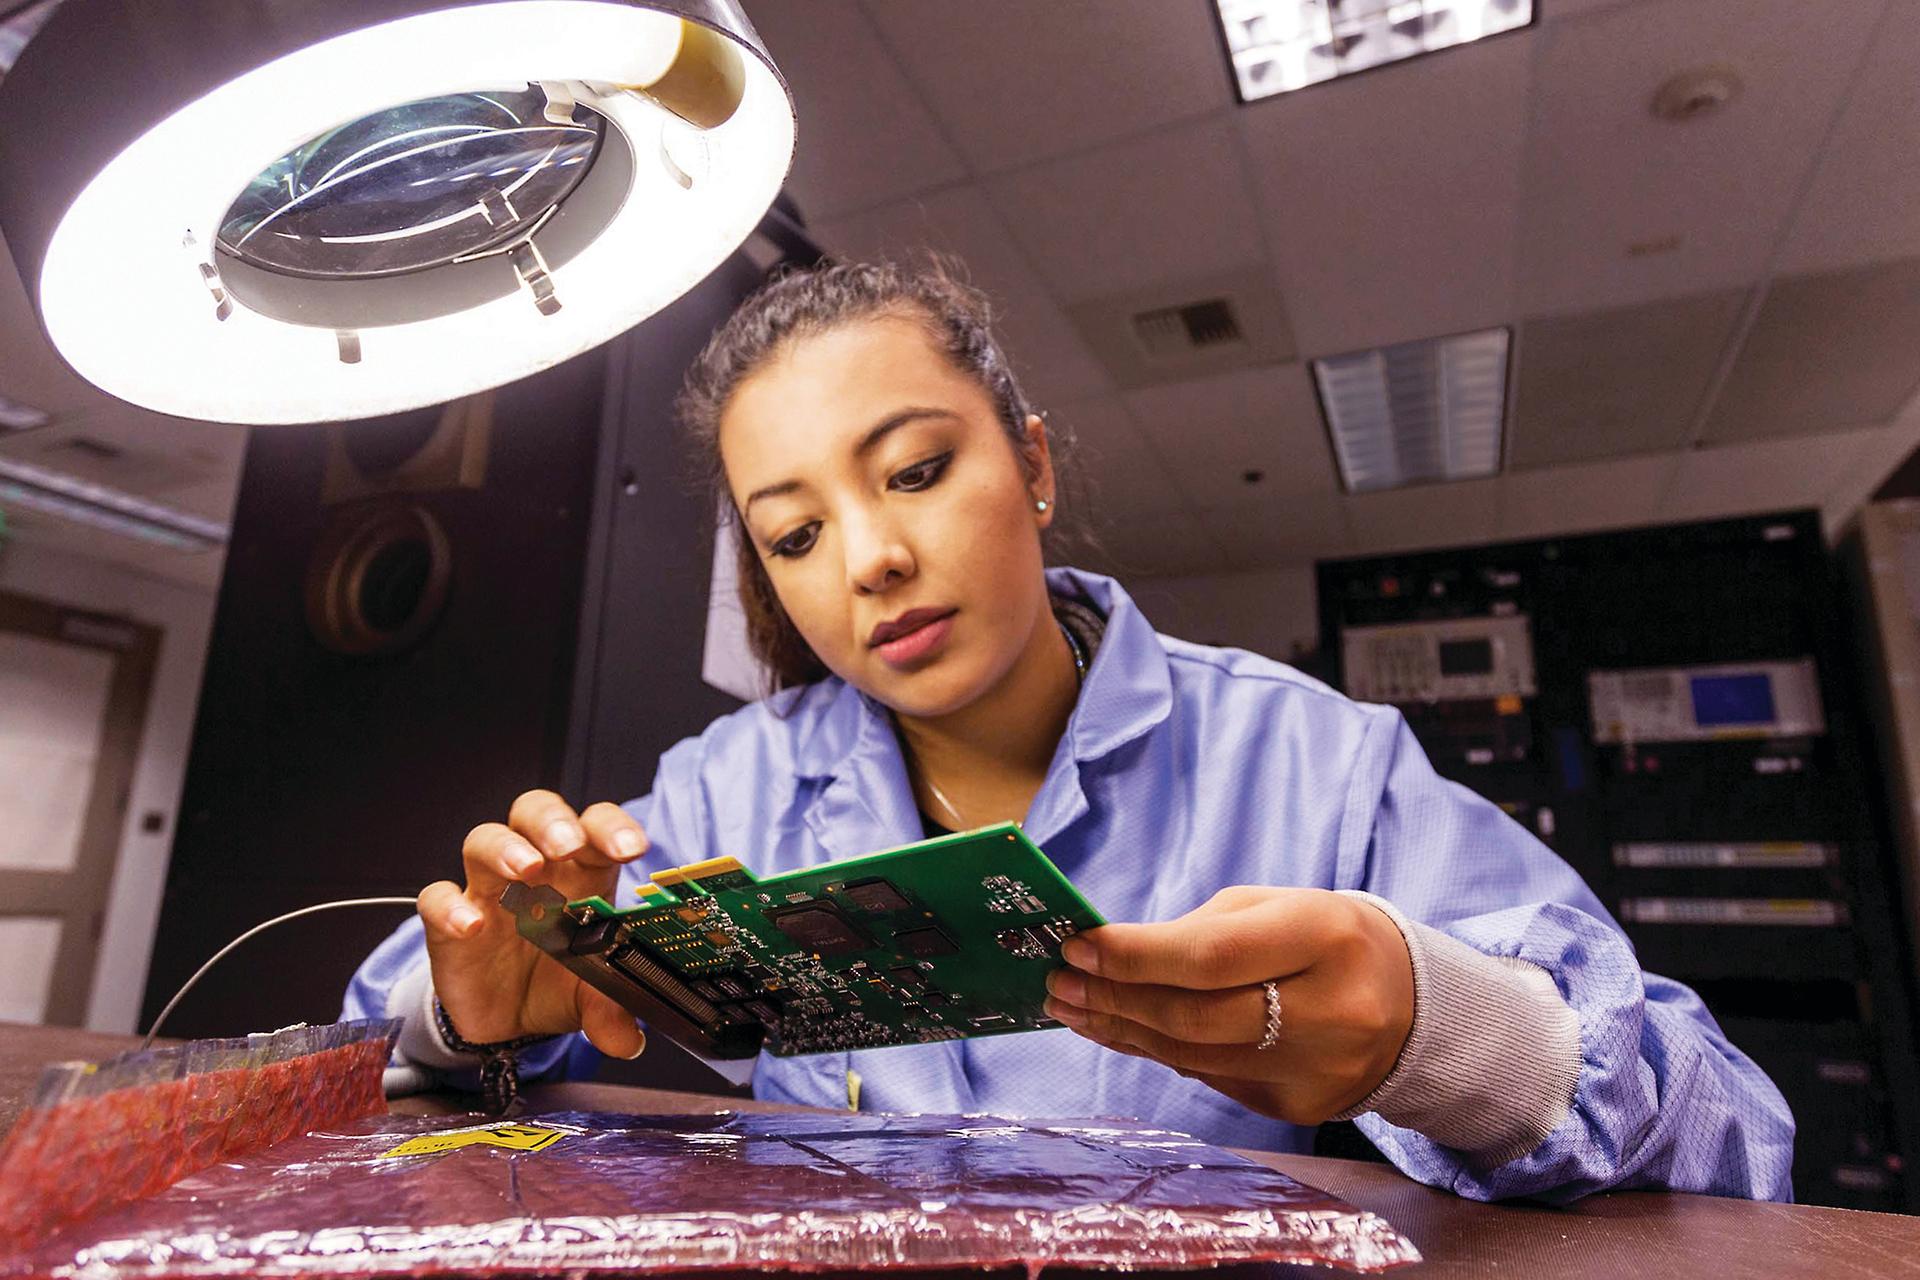 Woman looks at computer component